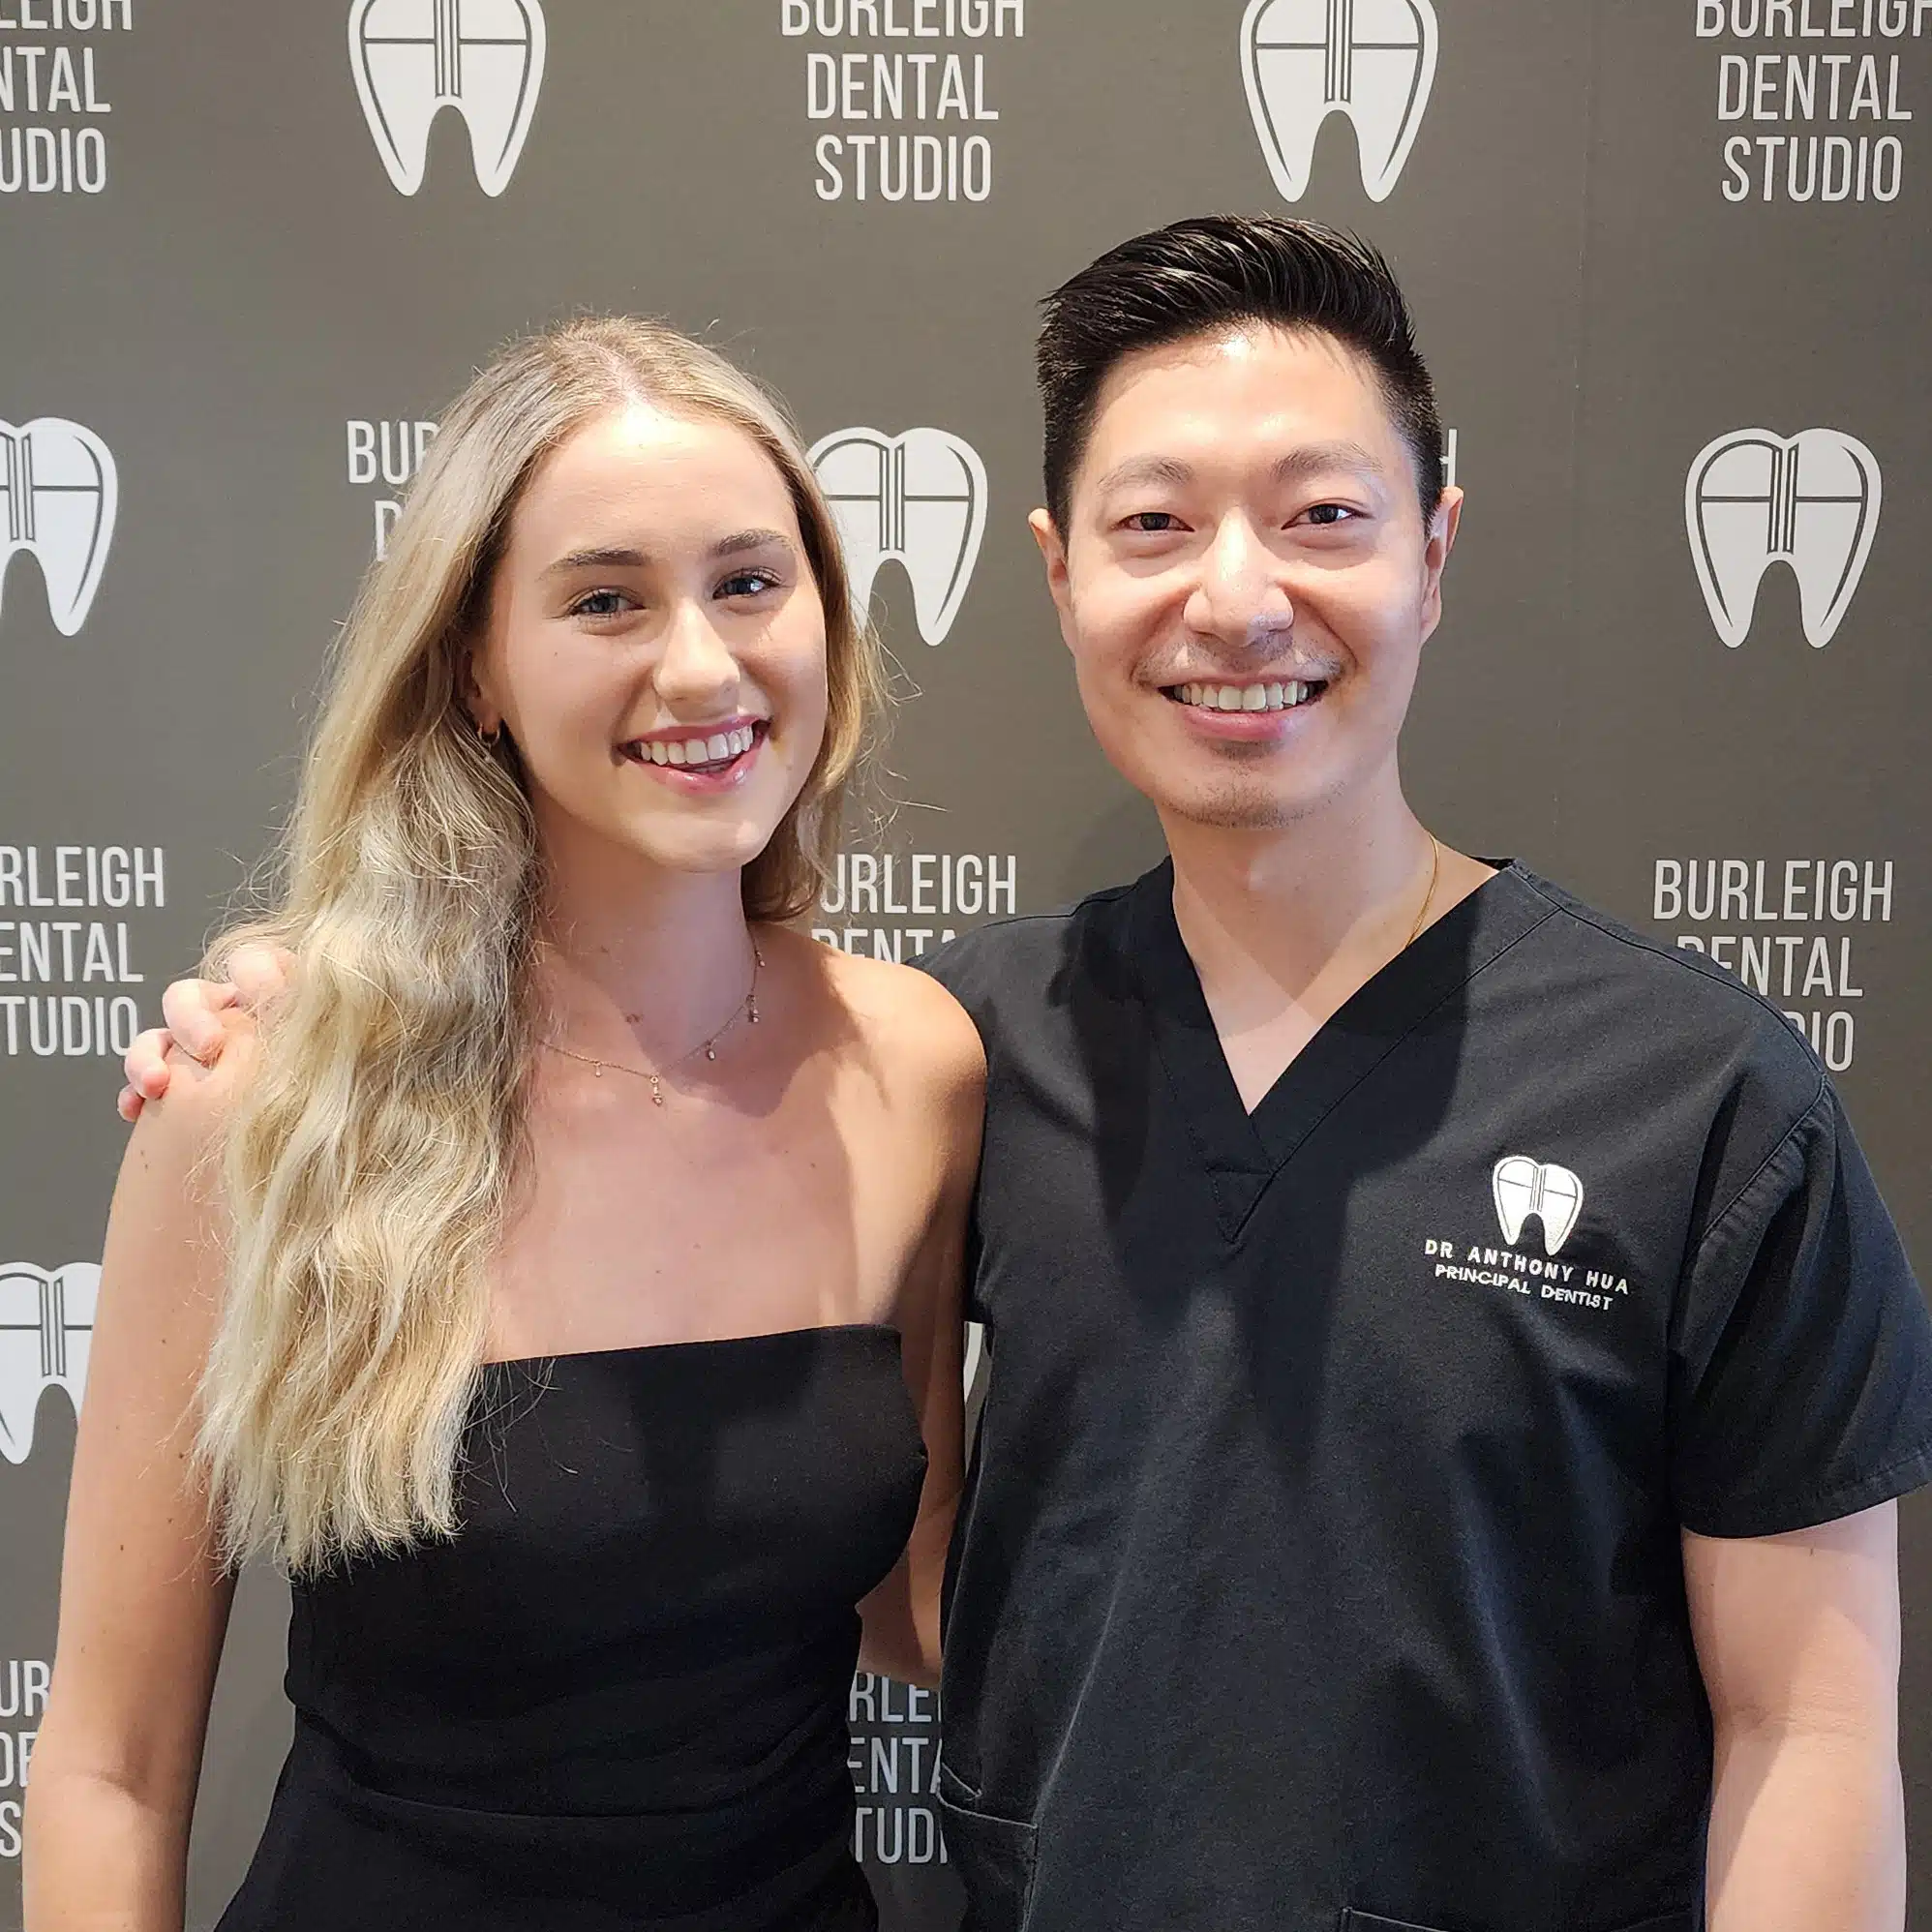 Happy Client 17 — Dentist In Burleigh Heads, QLD